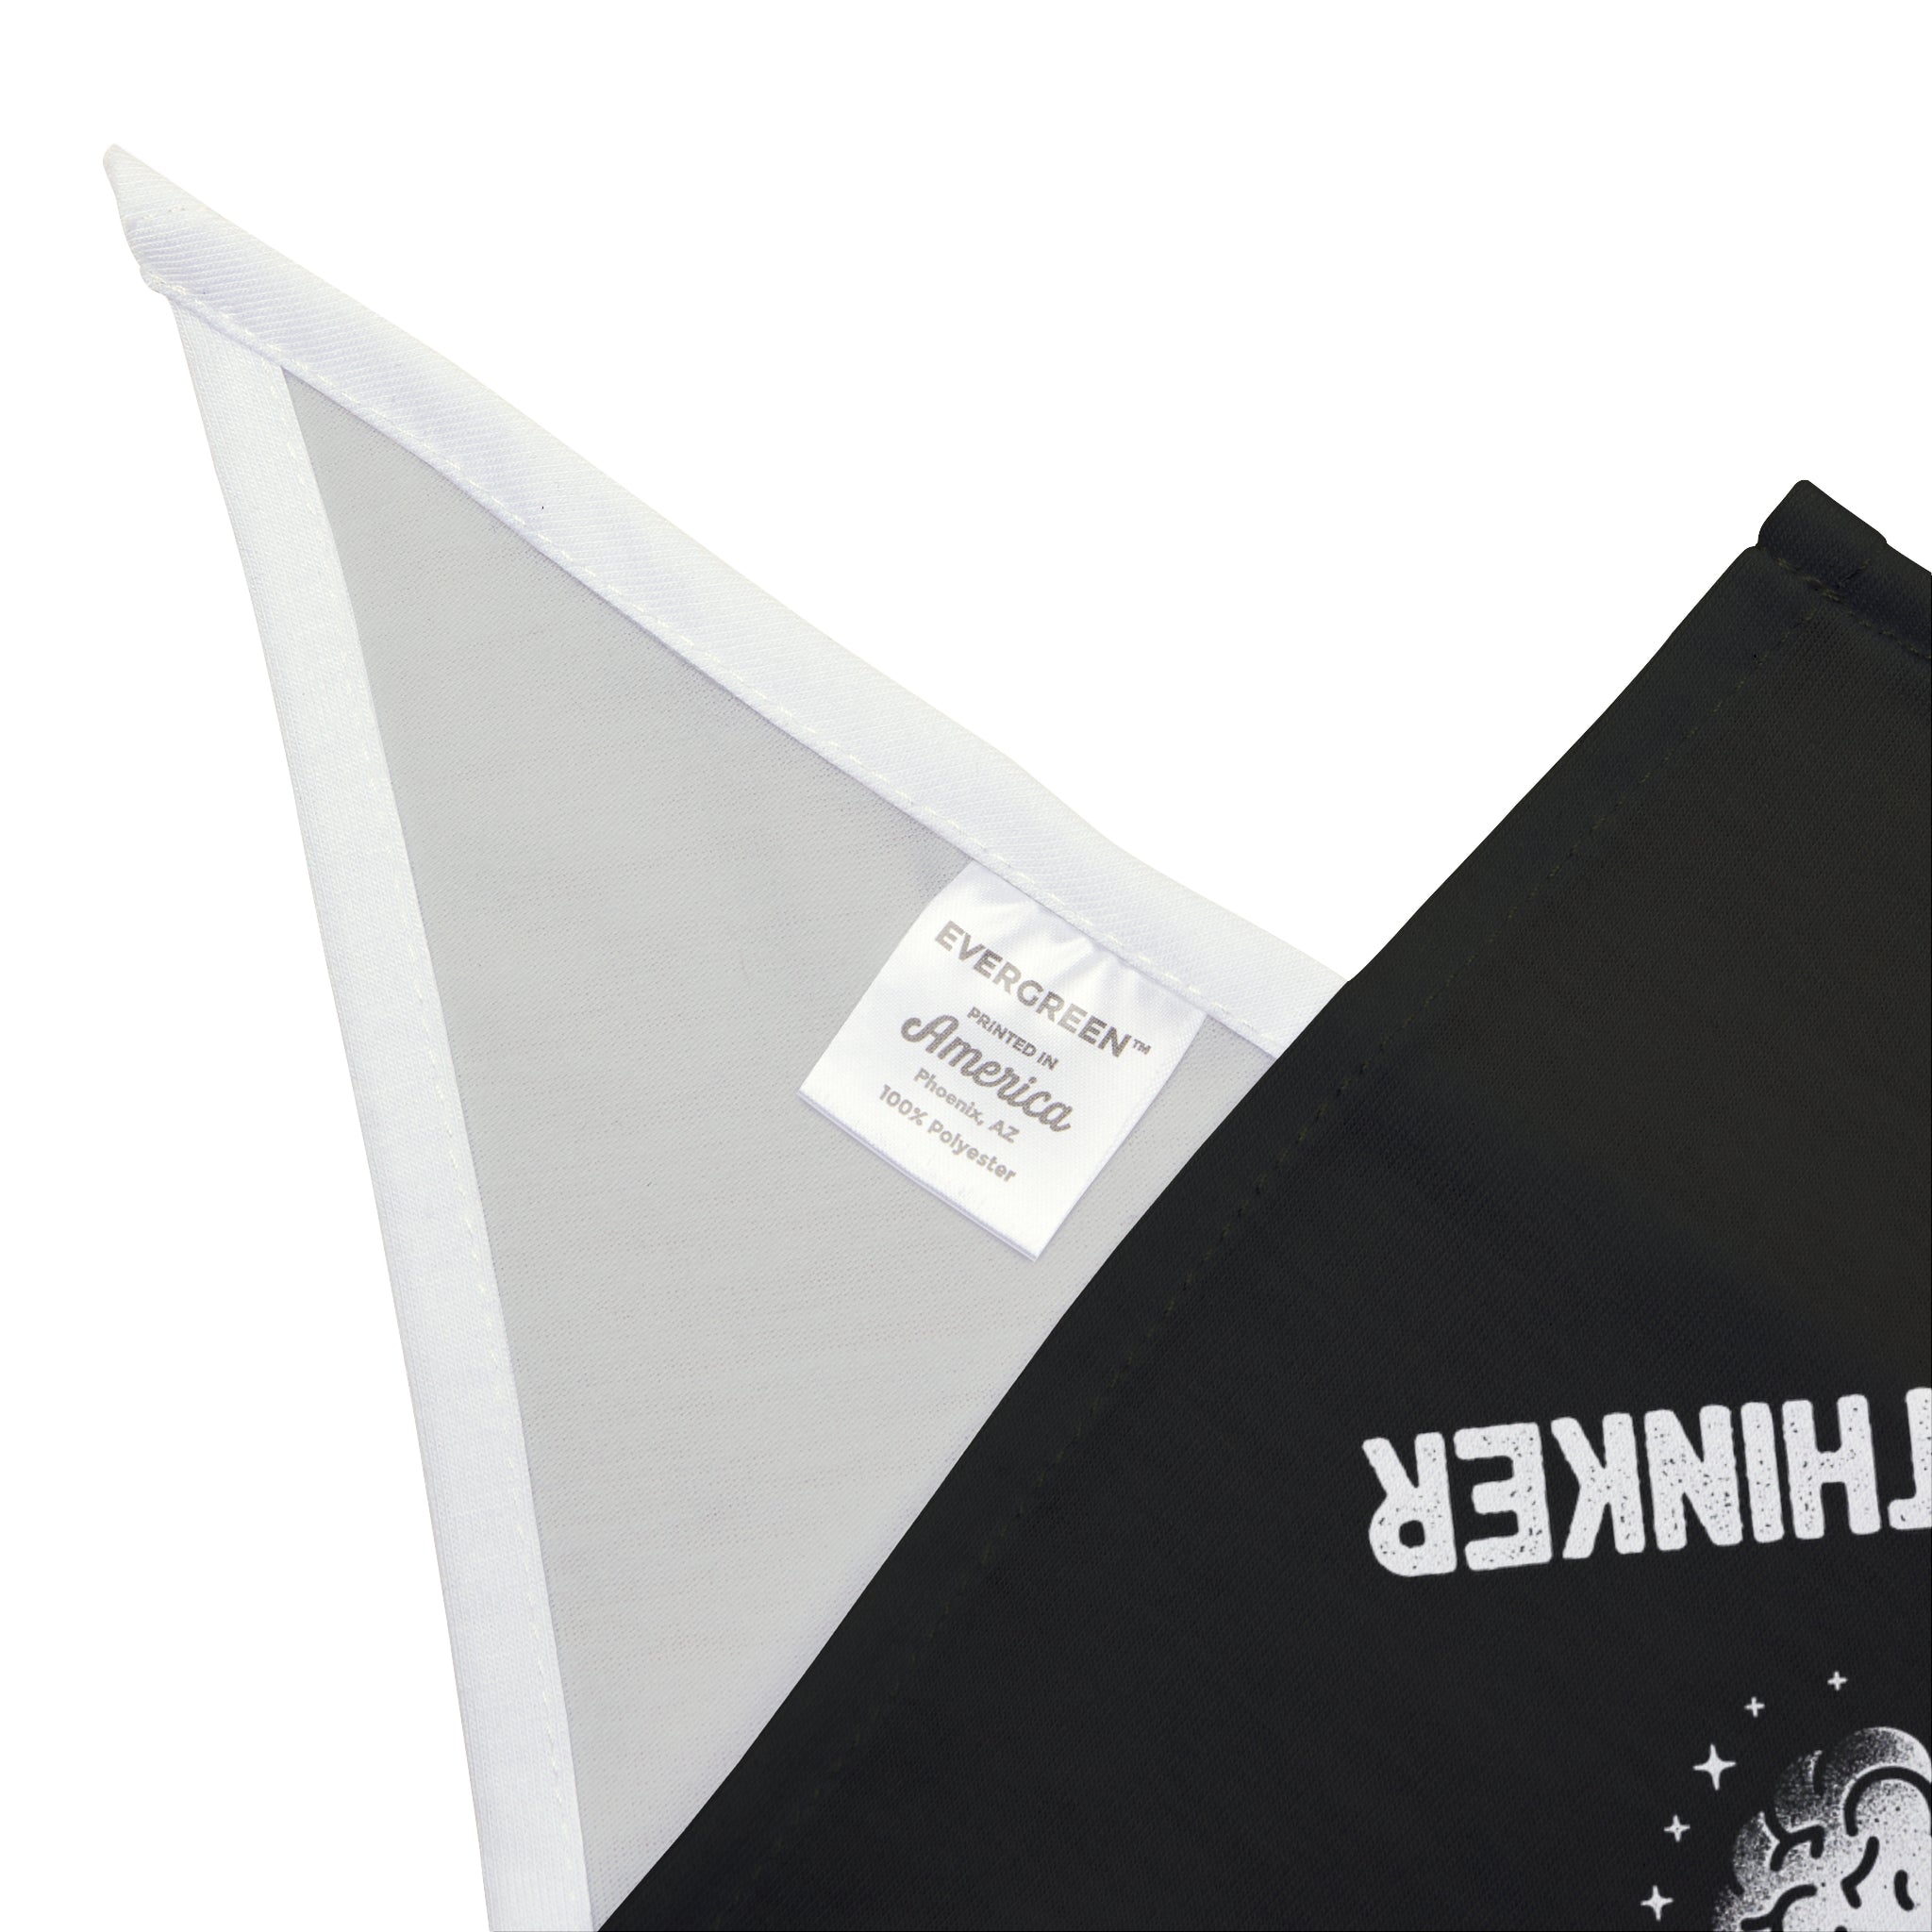 A close-up image showing the white tag on a black fabric with printed text. The tag reads "EVERGREEN, America" and "100% soft-spun polyester." The fabric, part of the Professional Overthinker - Pet Bandana collection, also has partially visible white text.